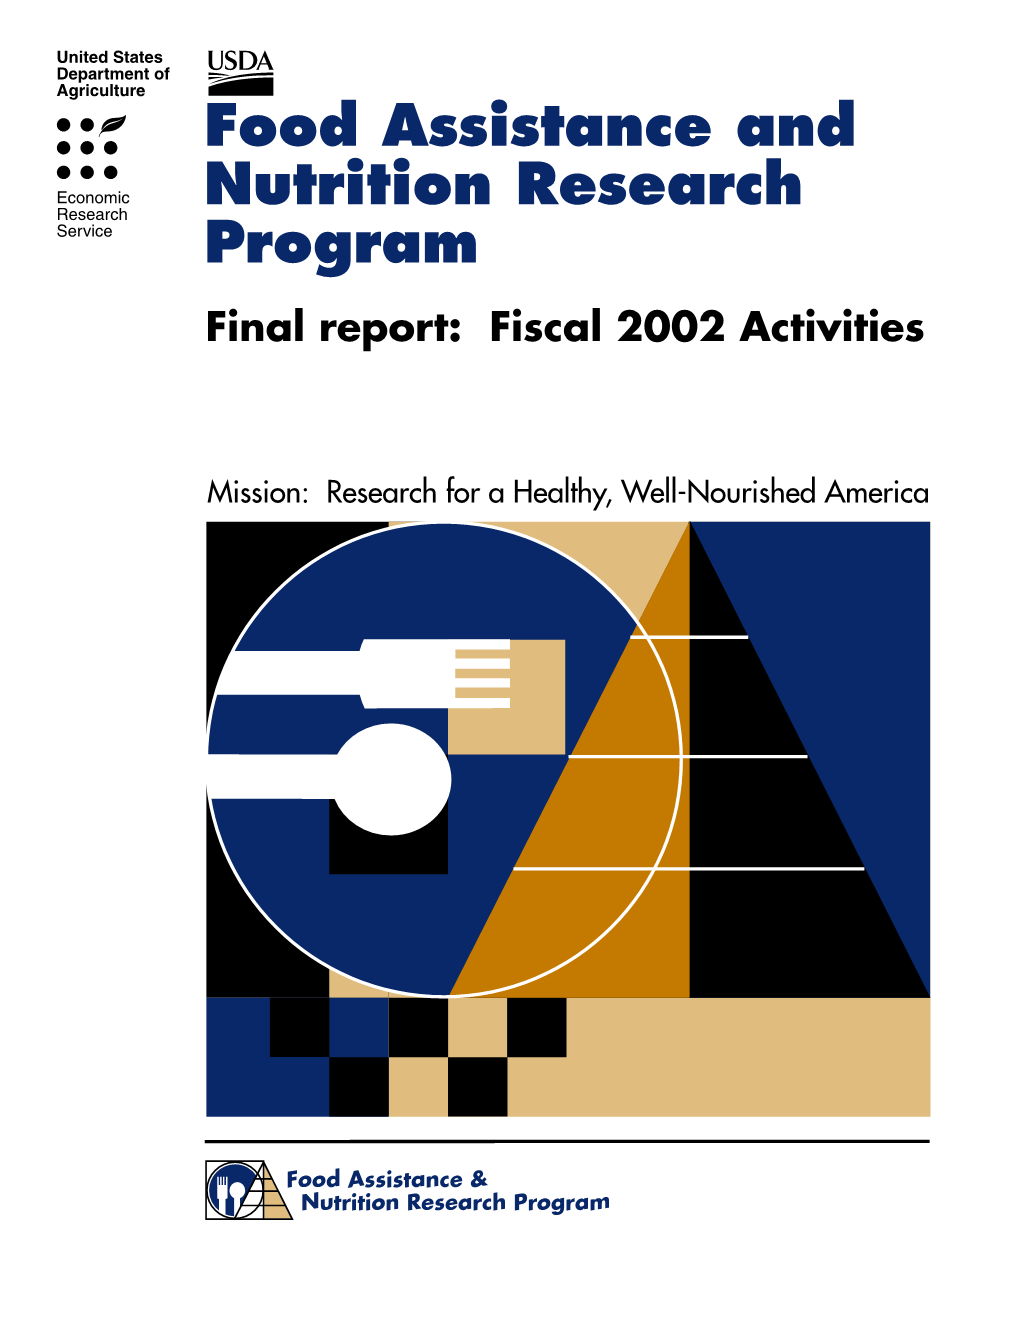 Food Assistance and Nutrition Research Program, Final Report: Fiscal 2002 Activities  1 Research Mission and Goals